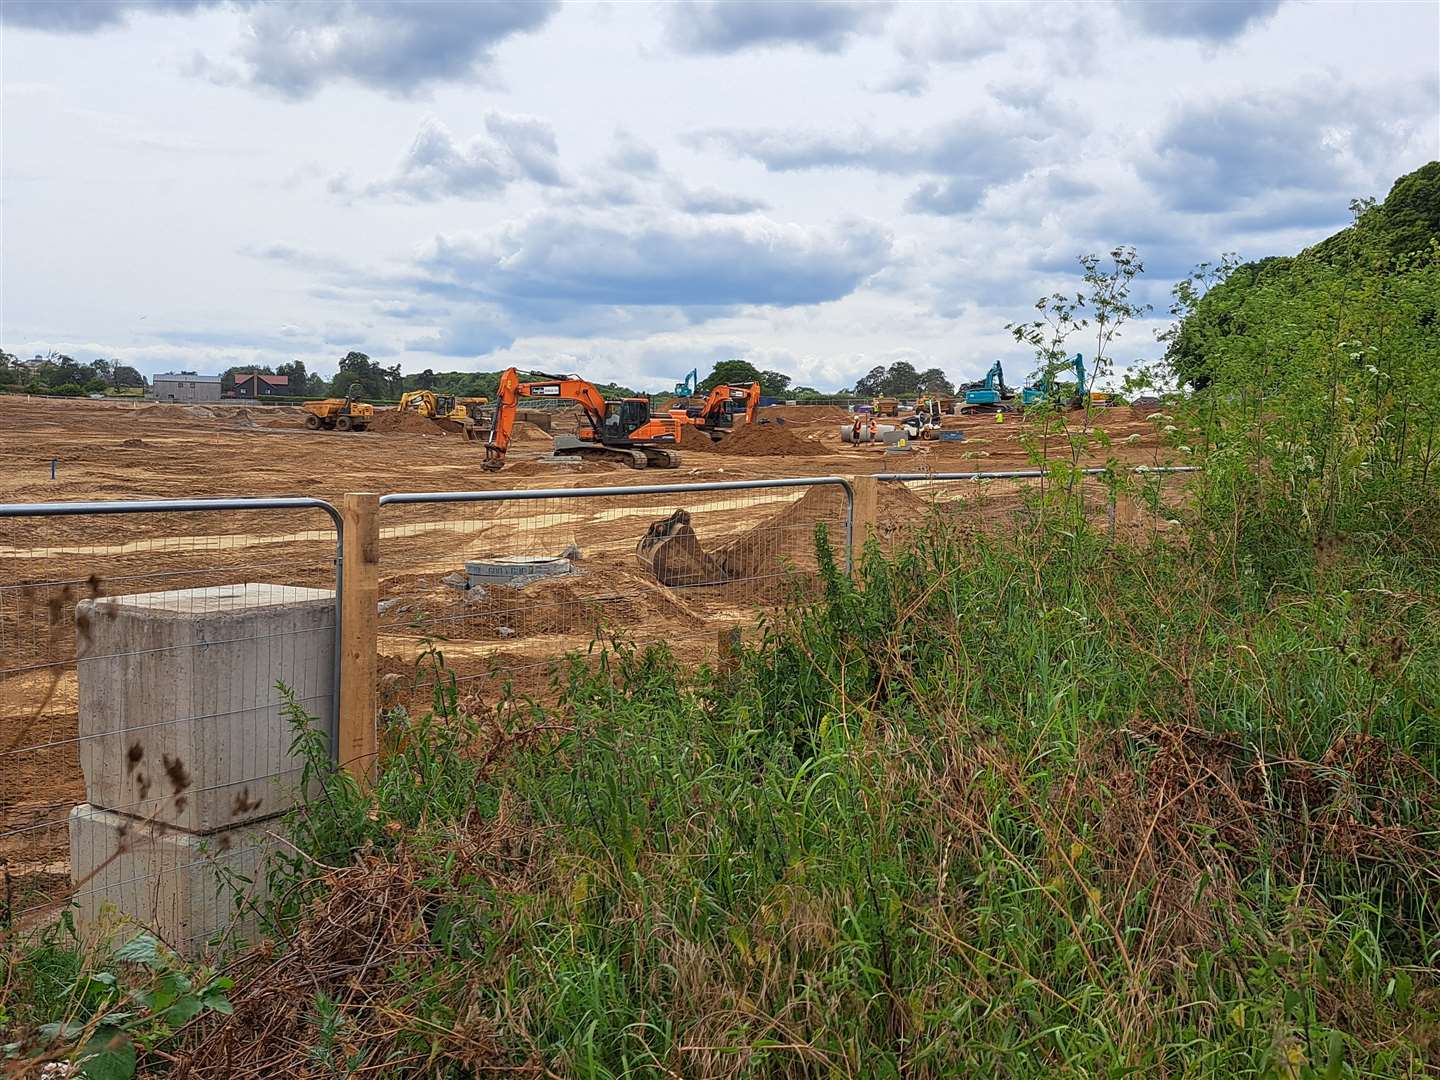 Construction started on the housing development in May